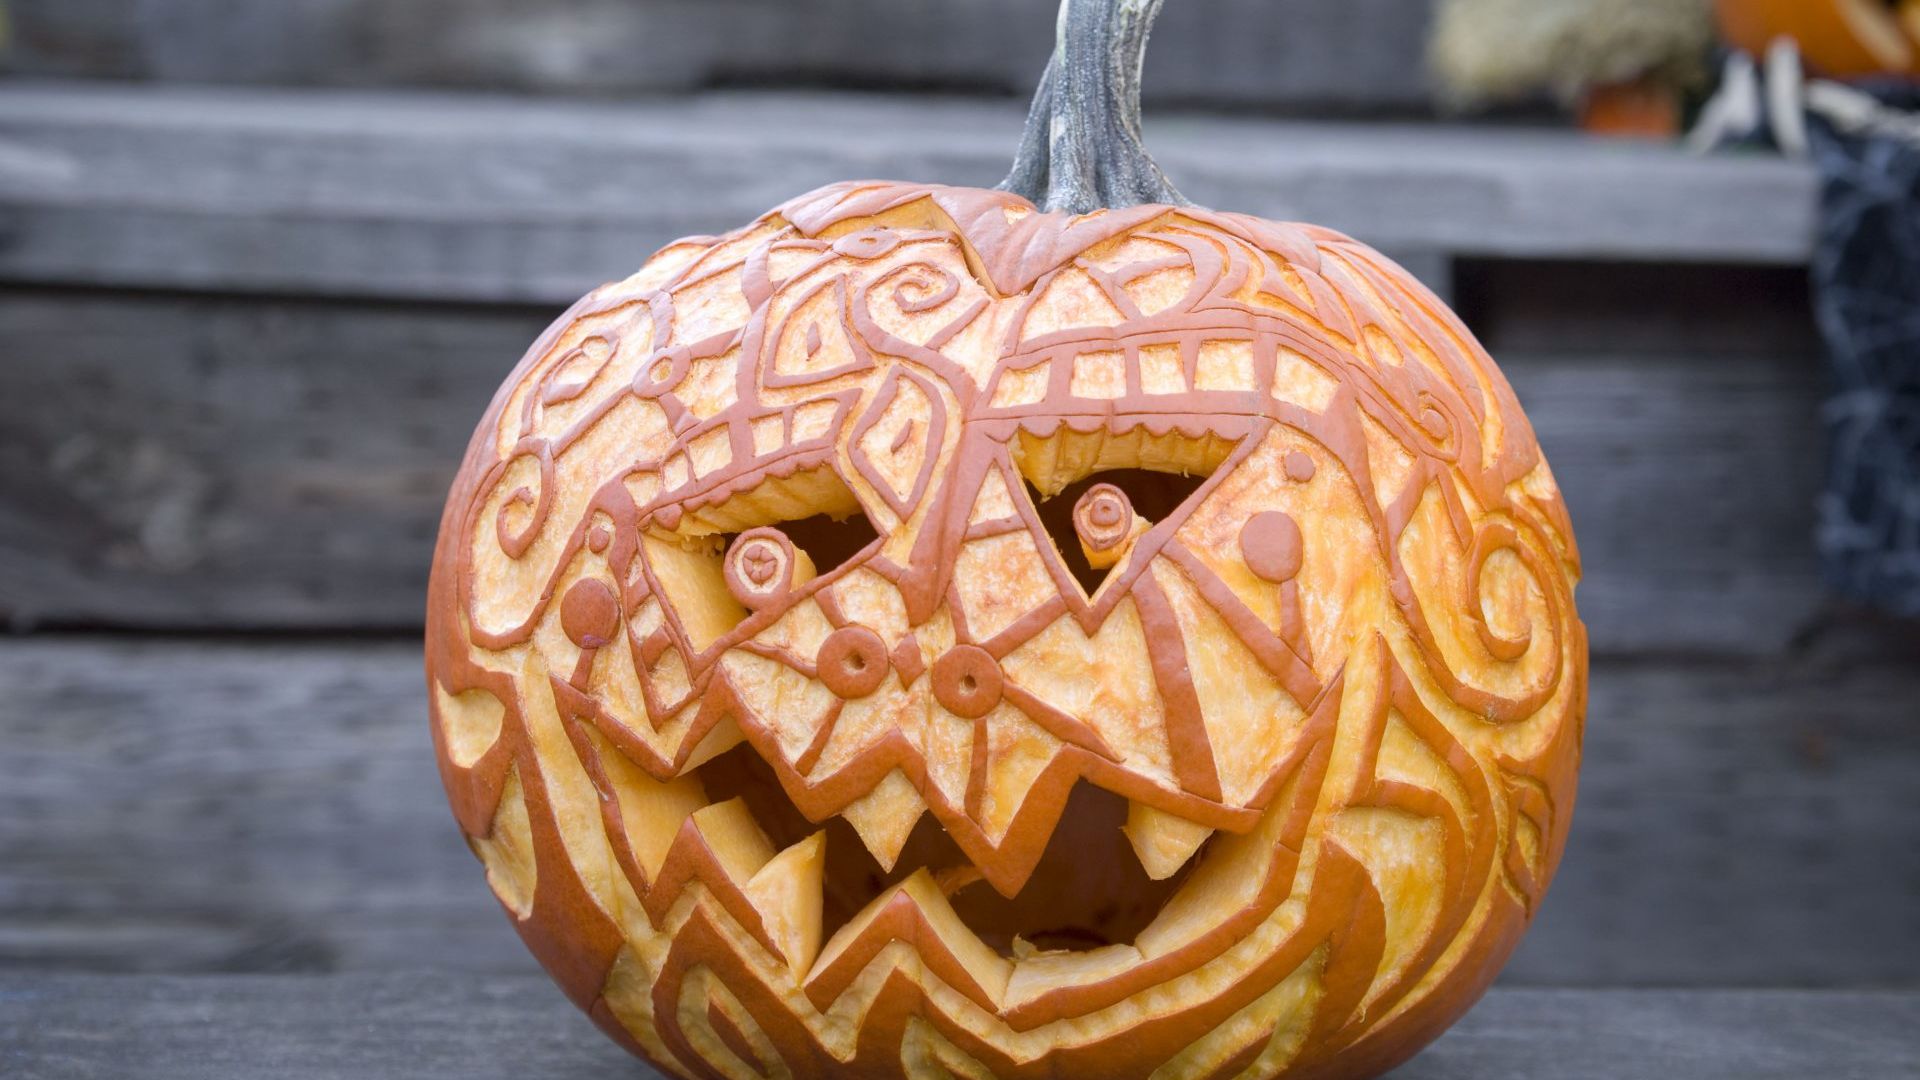 How to carve a Halloween pumpkin without making a mess